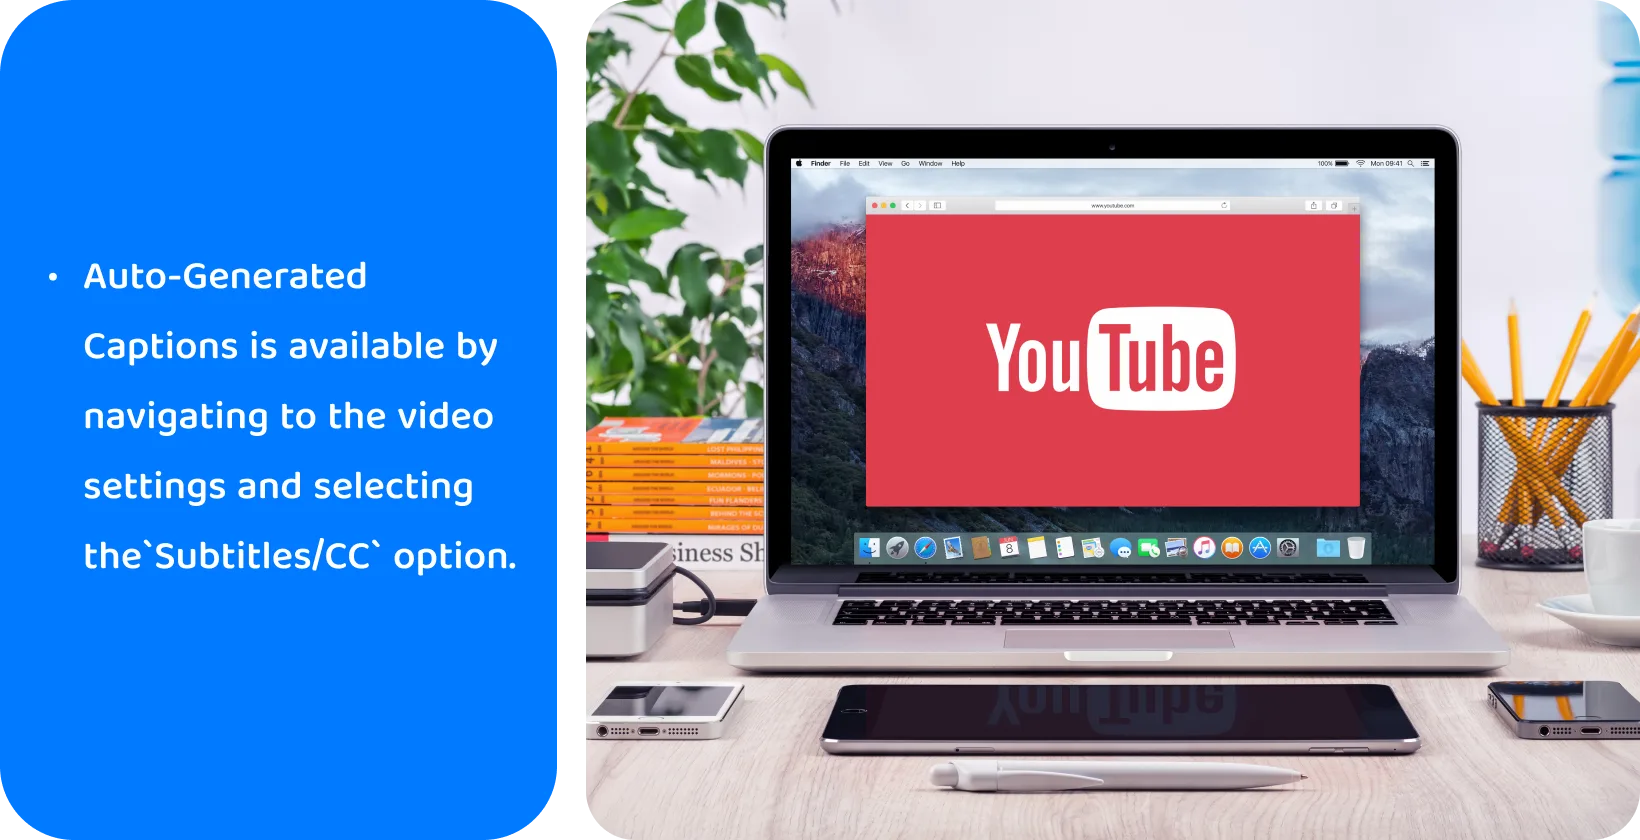 YouTube on a laptop screen, promoting the use of auto-generated captions for video accessibility and SEO.